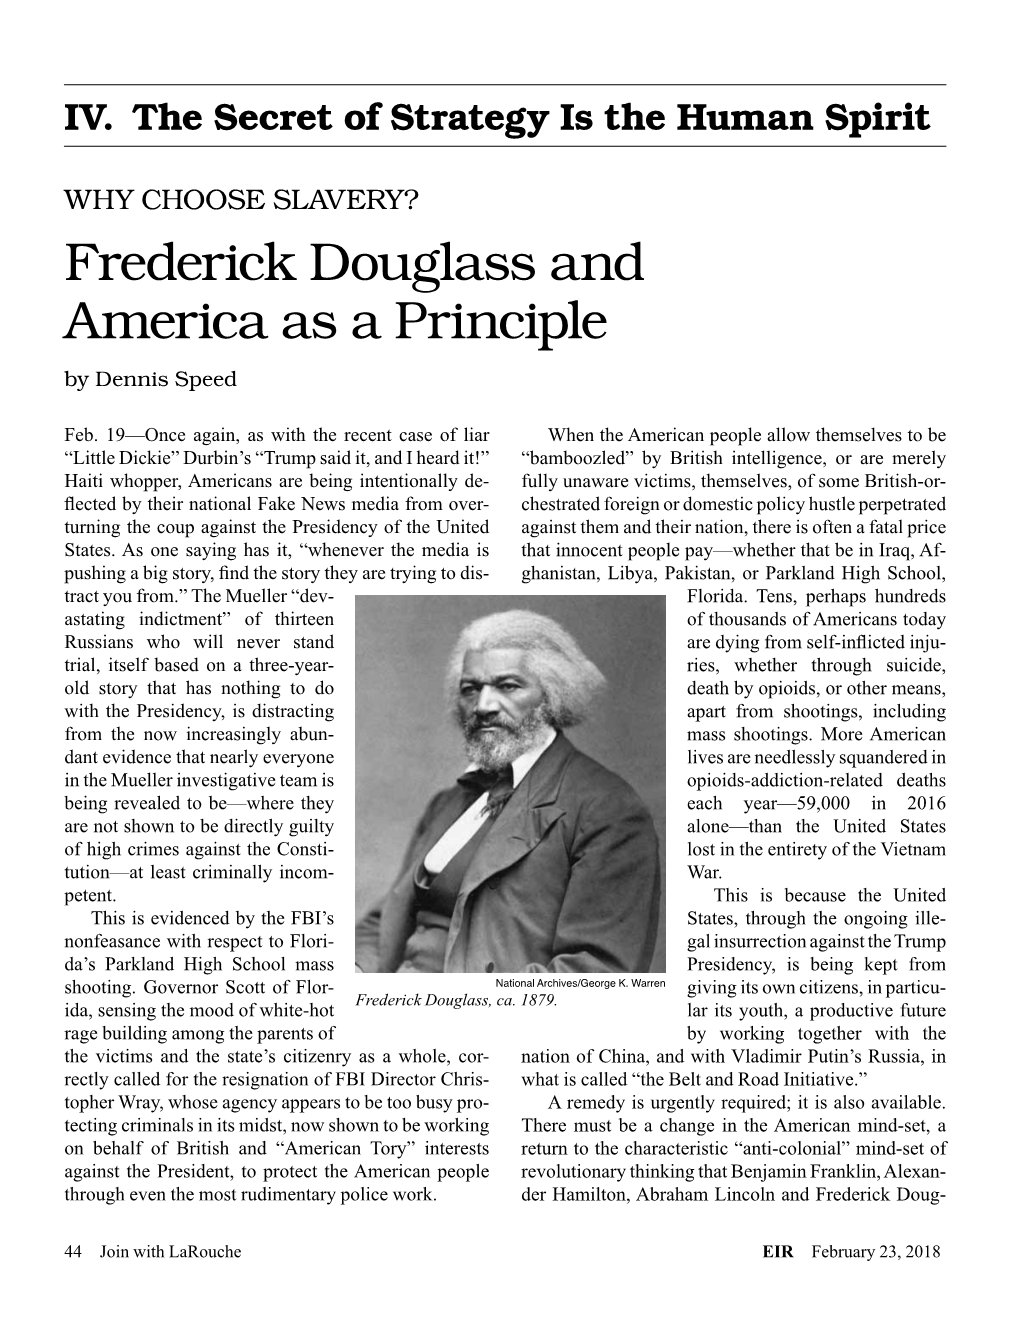 Frederick Douglass and America As a Principle by Dennis Speed